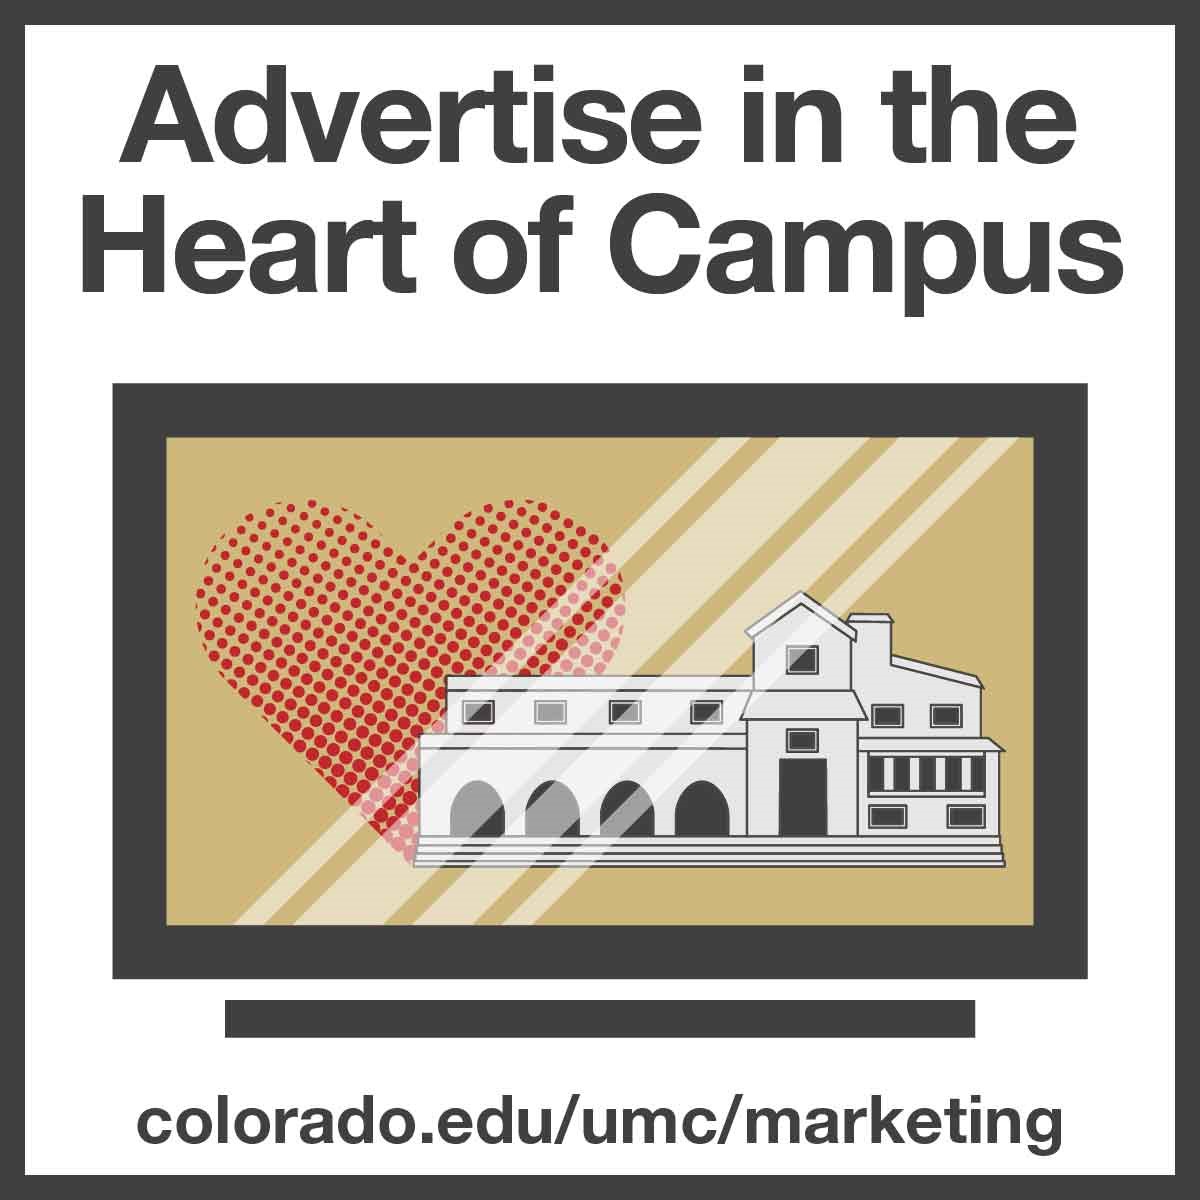 Advertise in the Heart of Campus